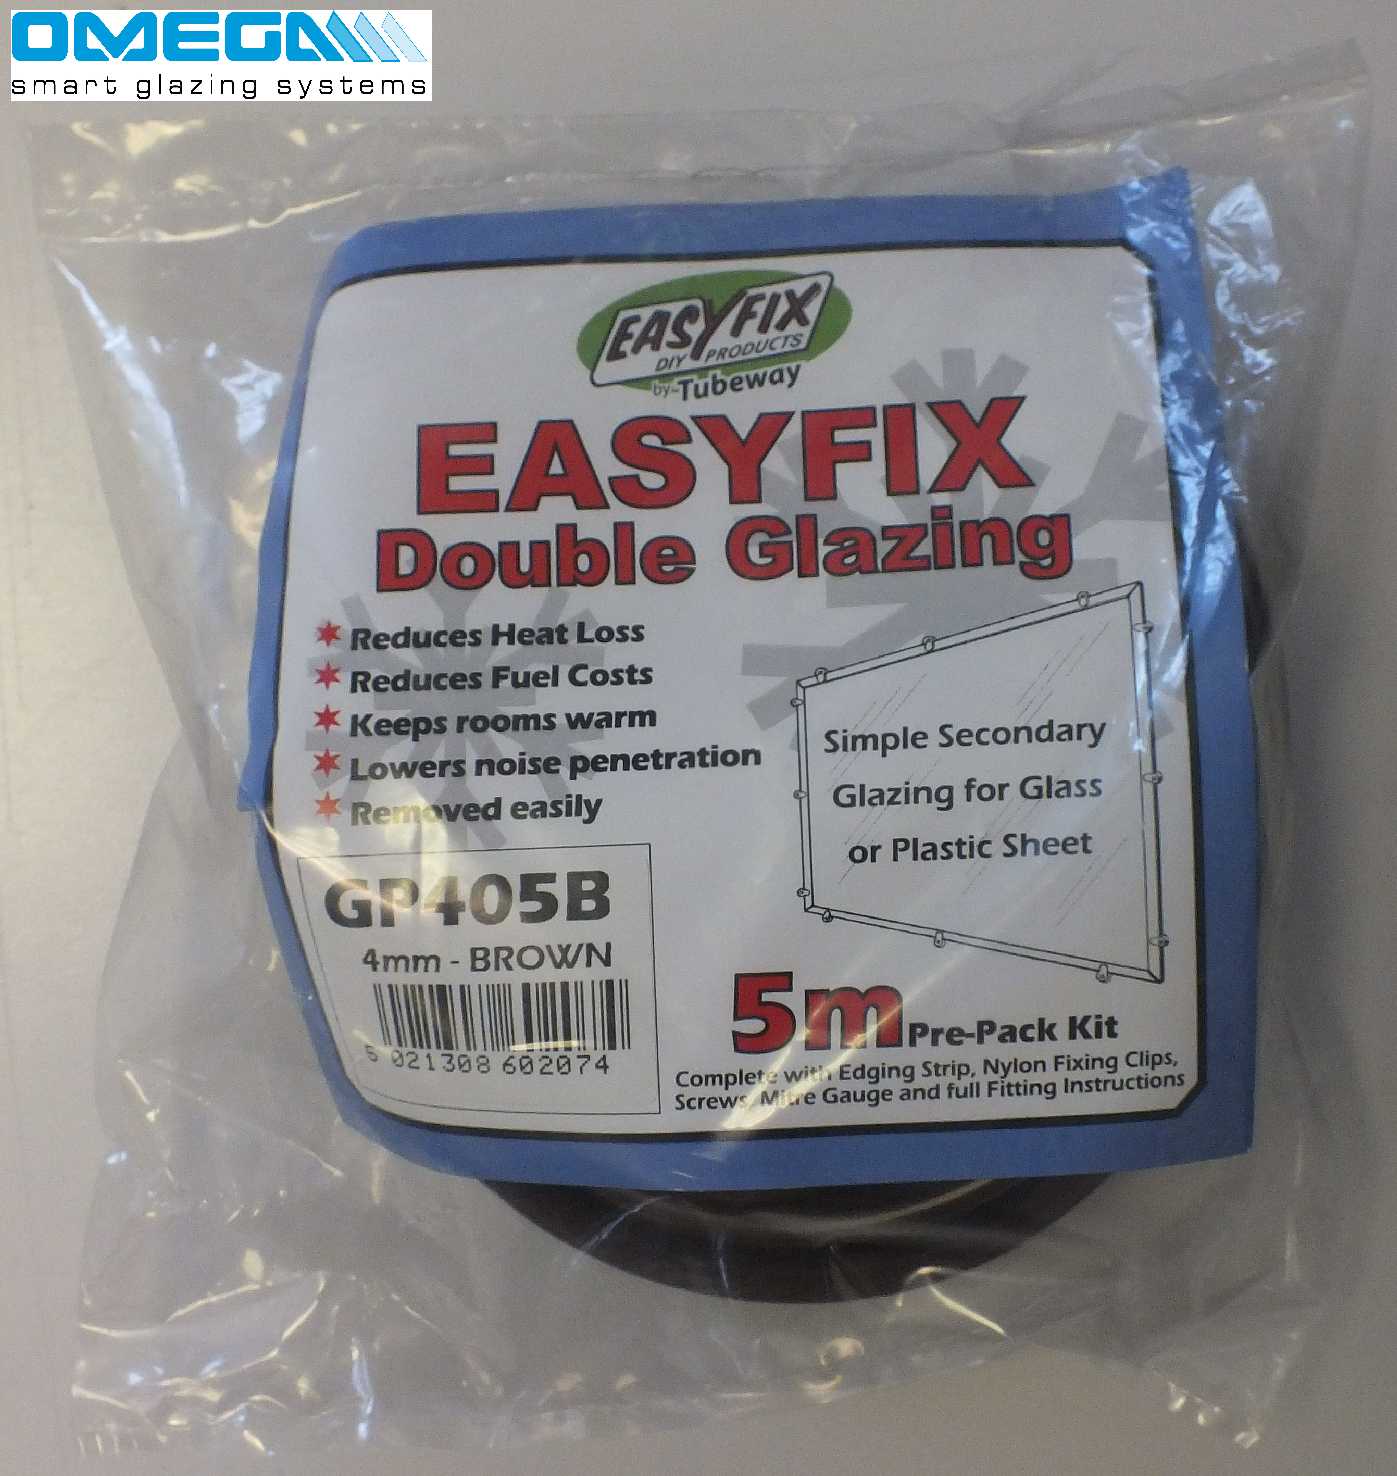 Easyfix Clipglaze Edging Kit - 5m roll of edging for 4mm Glazing Thickness, White, Clear or Brown from Omega Build